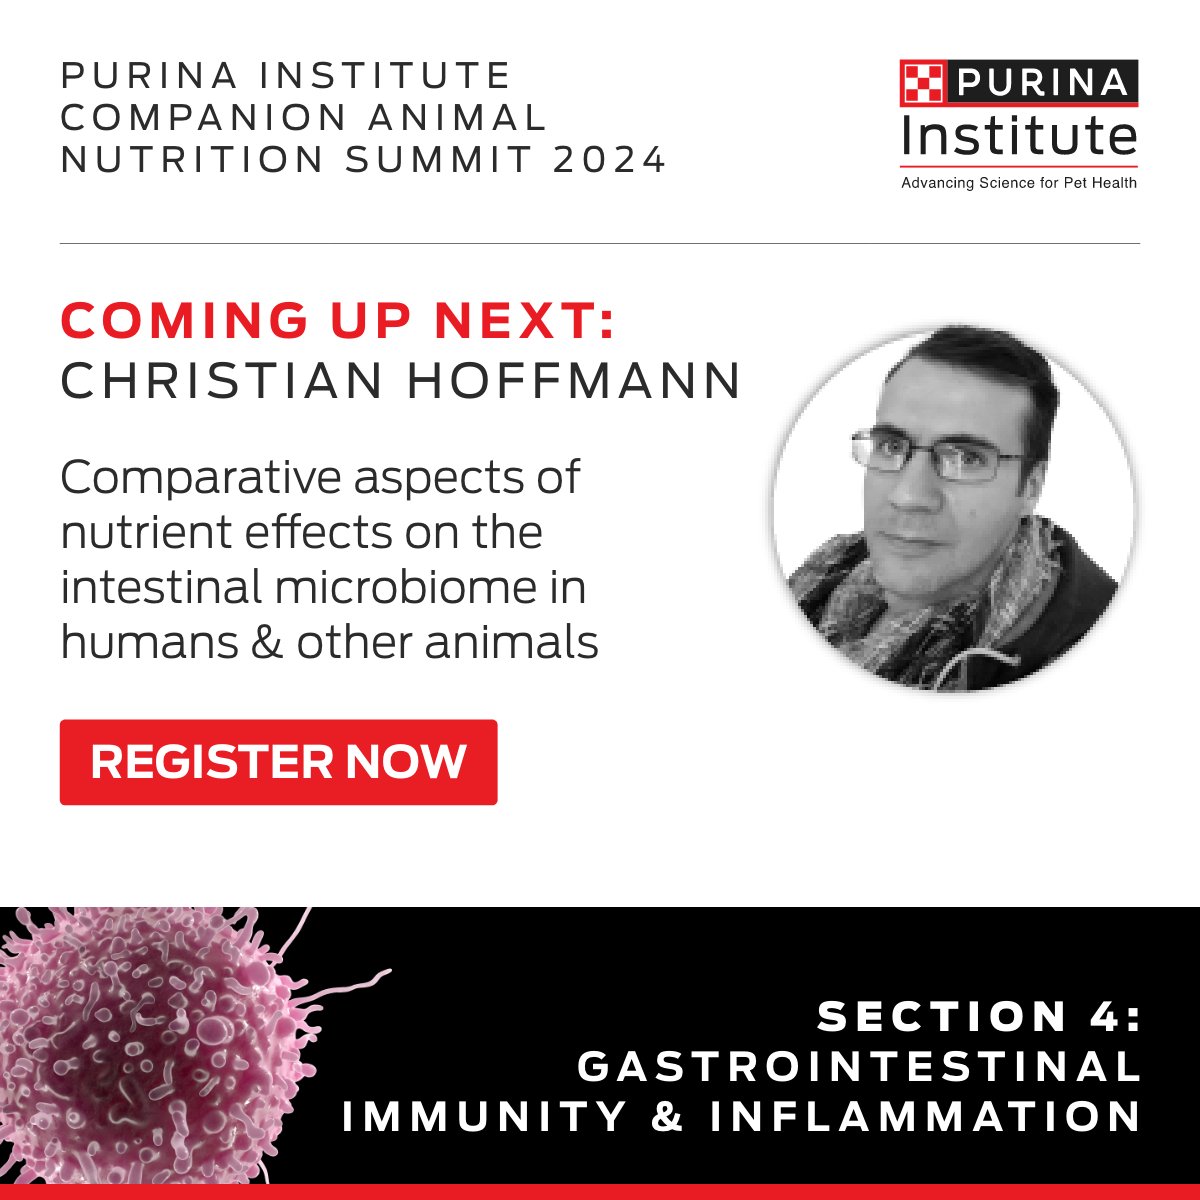 Last presentation of #CANSummit2024 with Christian Hoffmann, PhD on comparative aspects of nutrient effects on the intestinal microbiome in humans & other animals spr.ly/6184wjWsI #Veterinary #inflammation #microbiome @OSUVetCollege @tamuvetmed @ufvetmed @CSUVetMedBioSci